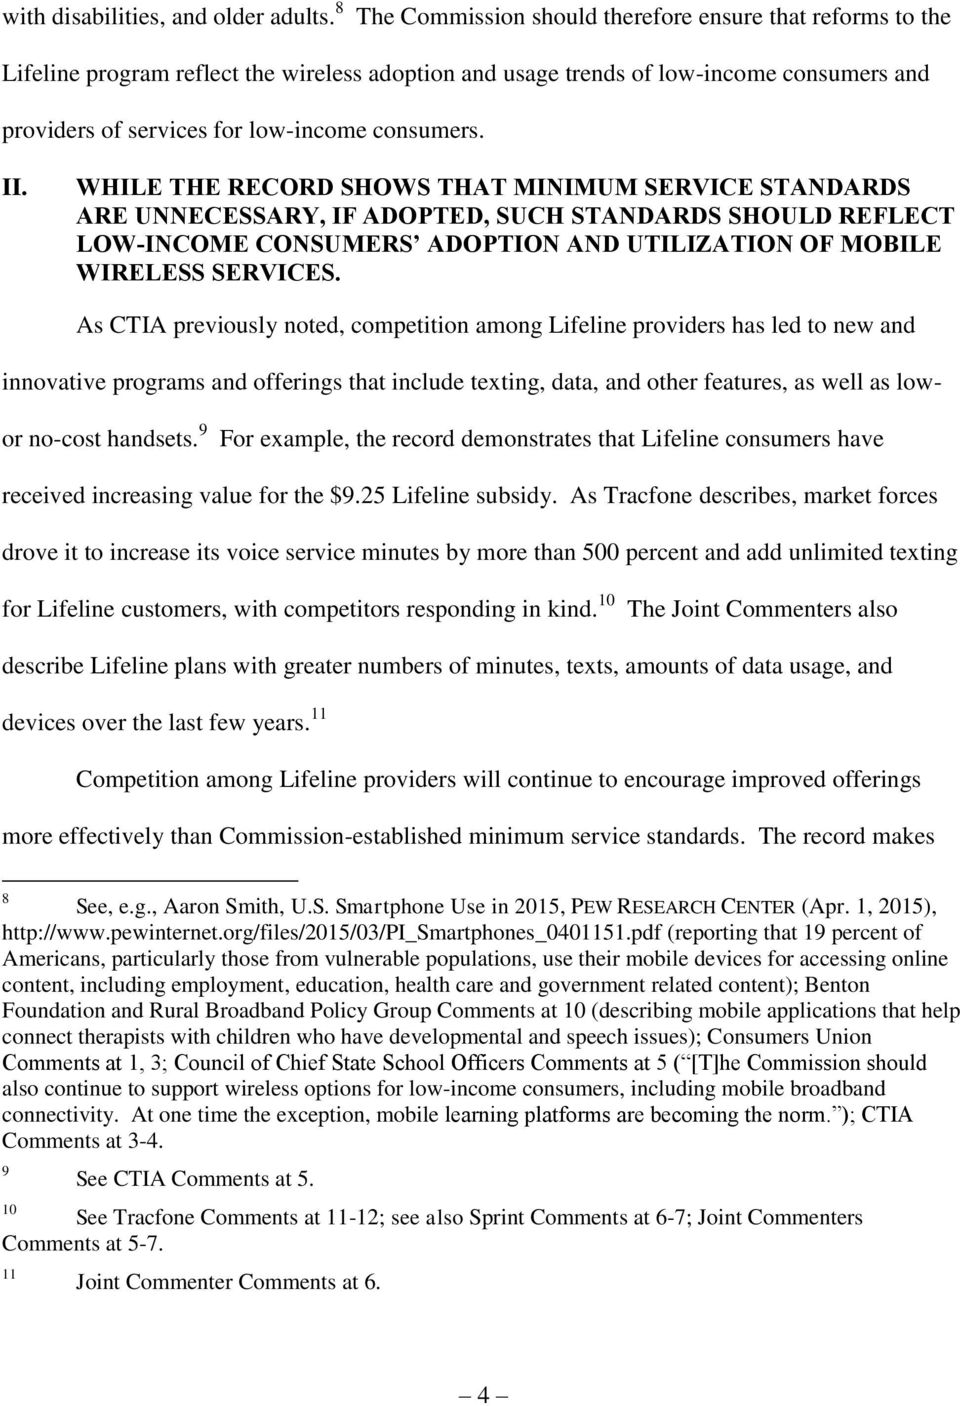 II. WHILE THE RECORD SHOWS THAT MINIMUM SERVICE STANDARDS ARE UNNECESSARY, IF ADOPTED, SUCH STANDARDS SHOULD REFLECT LOW-INCOME CONSUMERS ADOPTION AND UTILIZATION OF MOBILE WIRELESS SERVICES.